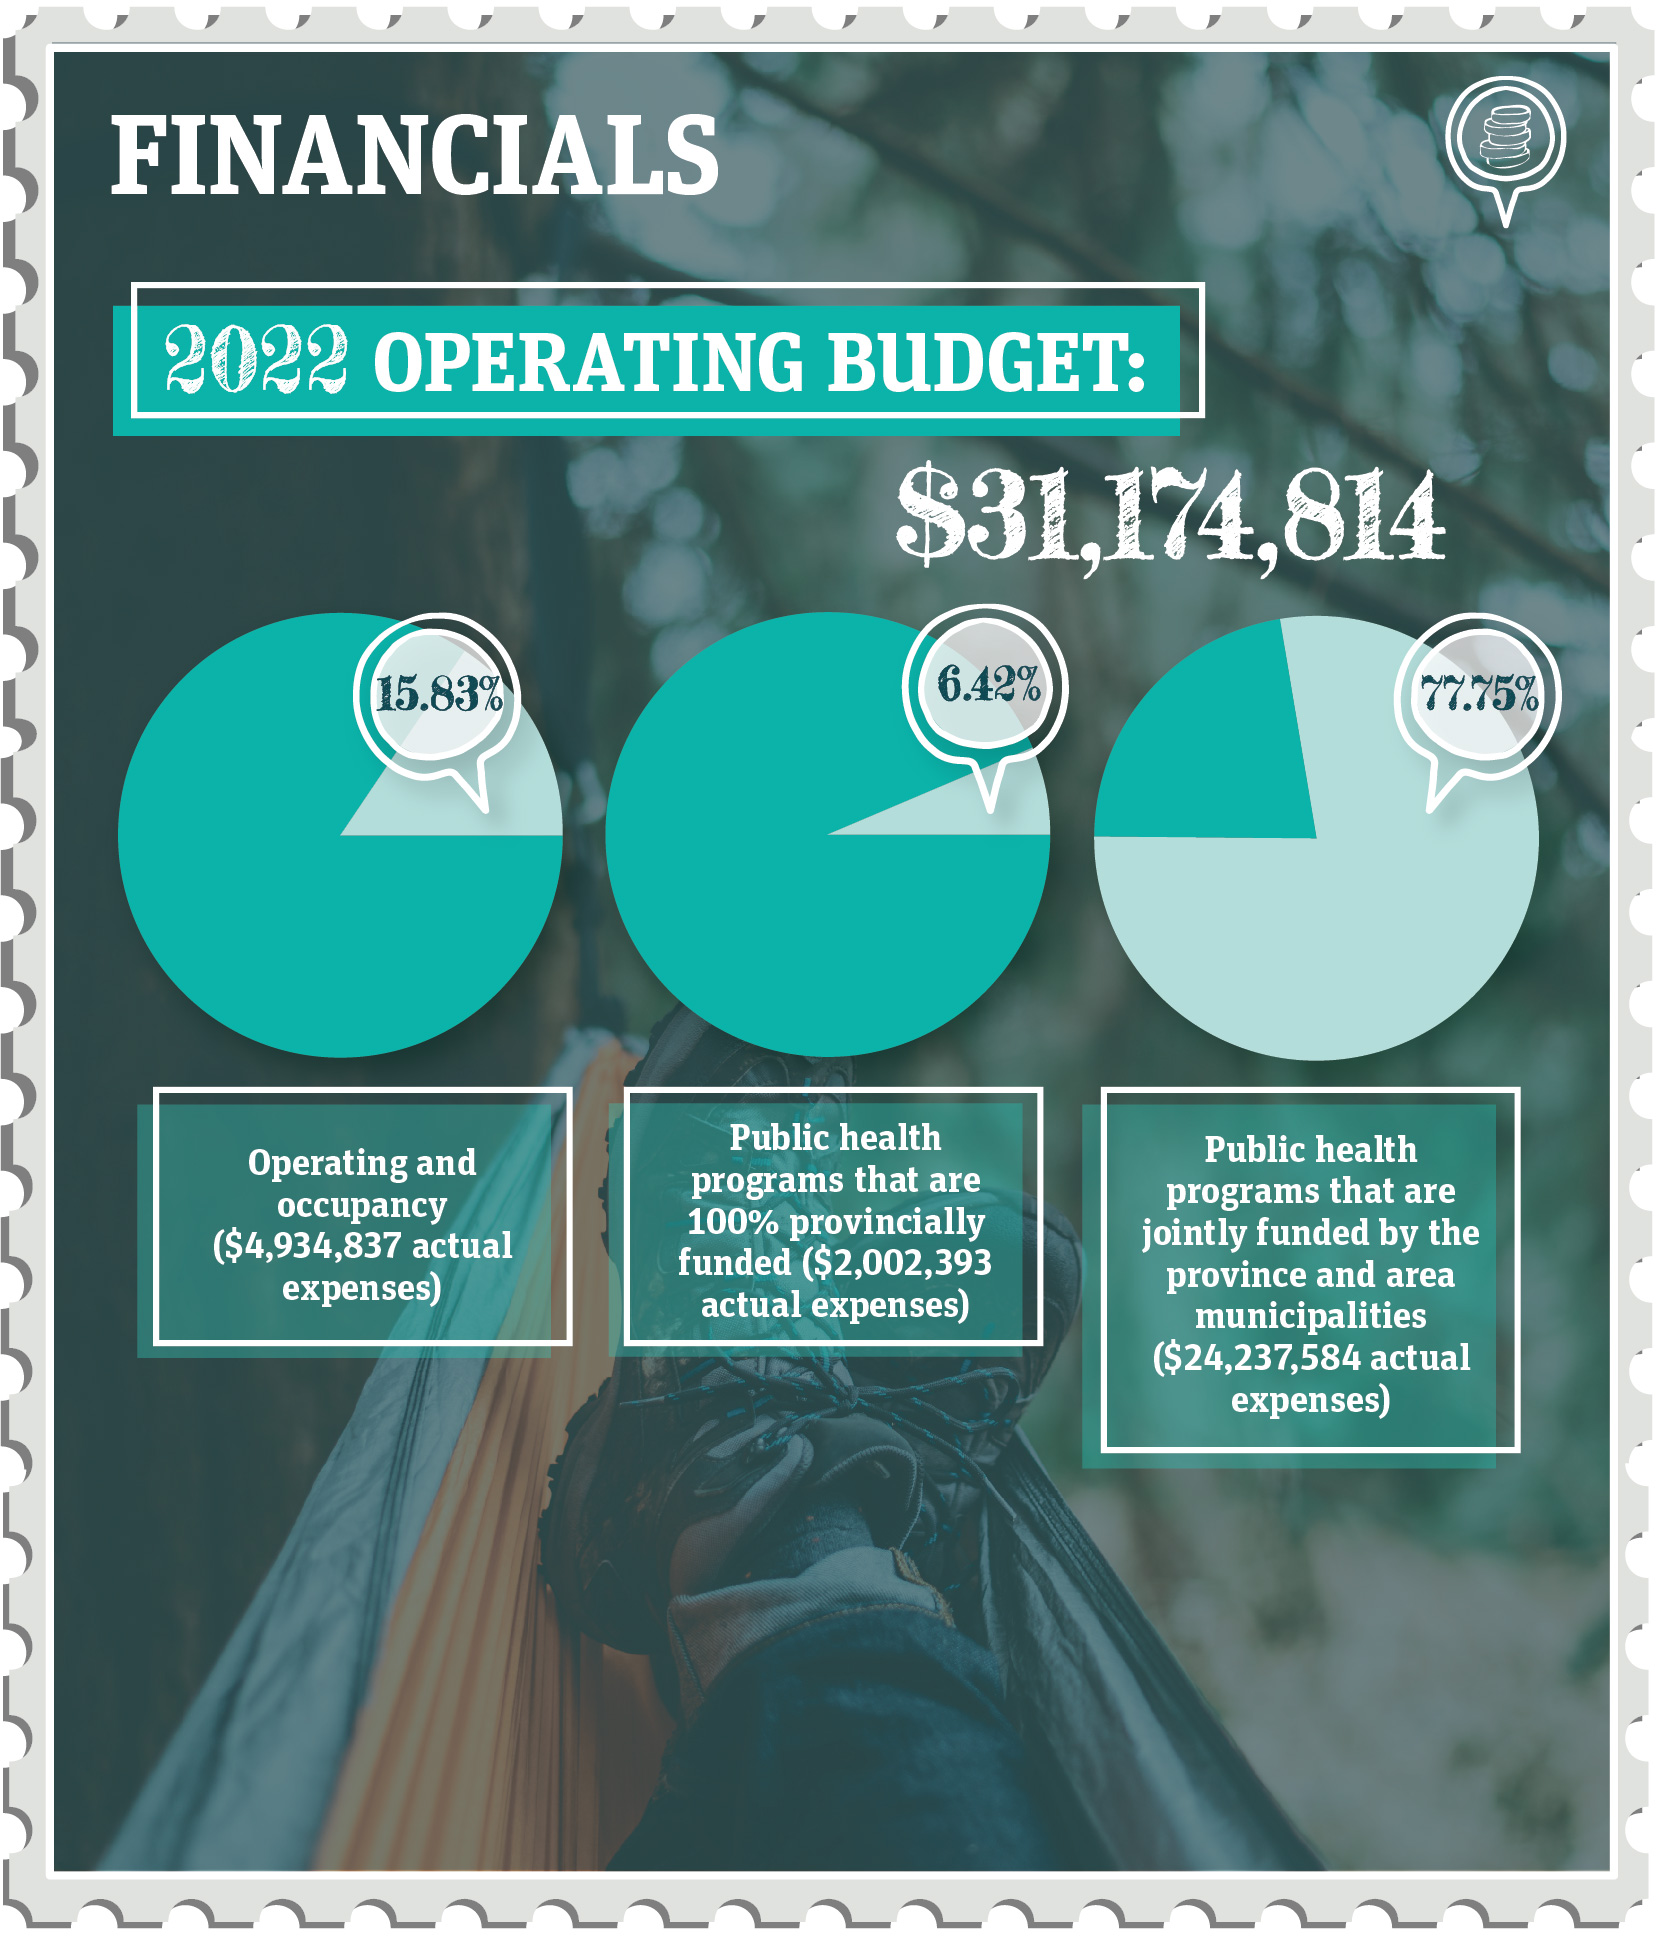 Financials. 2022 operating budget: $31,174,814. 15.83% operating and occupancy ($4,934,837 actual expenses), 6.42% public health programs that are 100% provincially funded ($2,002,393 actual expenses), 77.75% public health programs jointly funded by the province and area municipalities ($24,237,584 actual expenses)